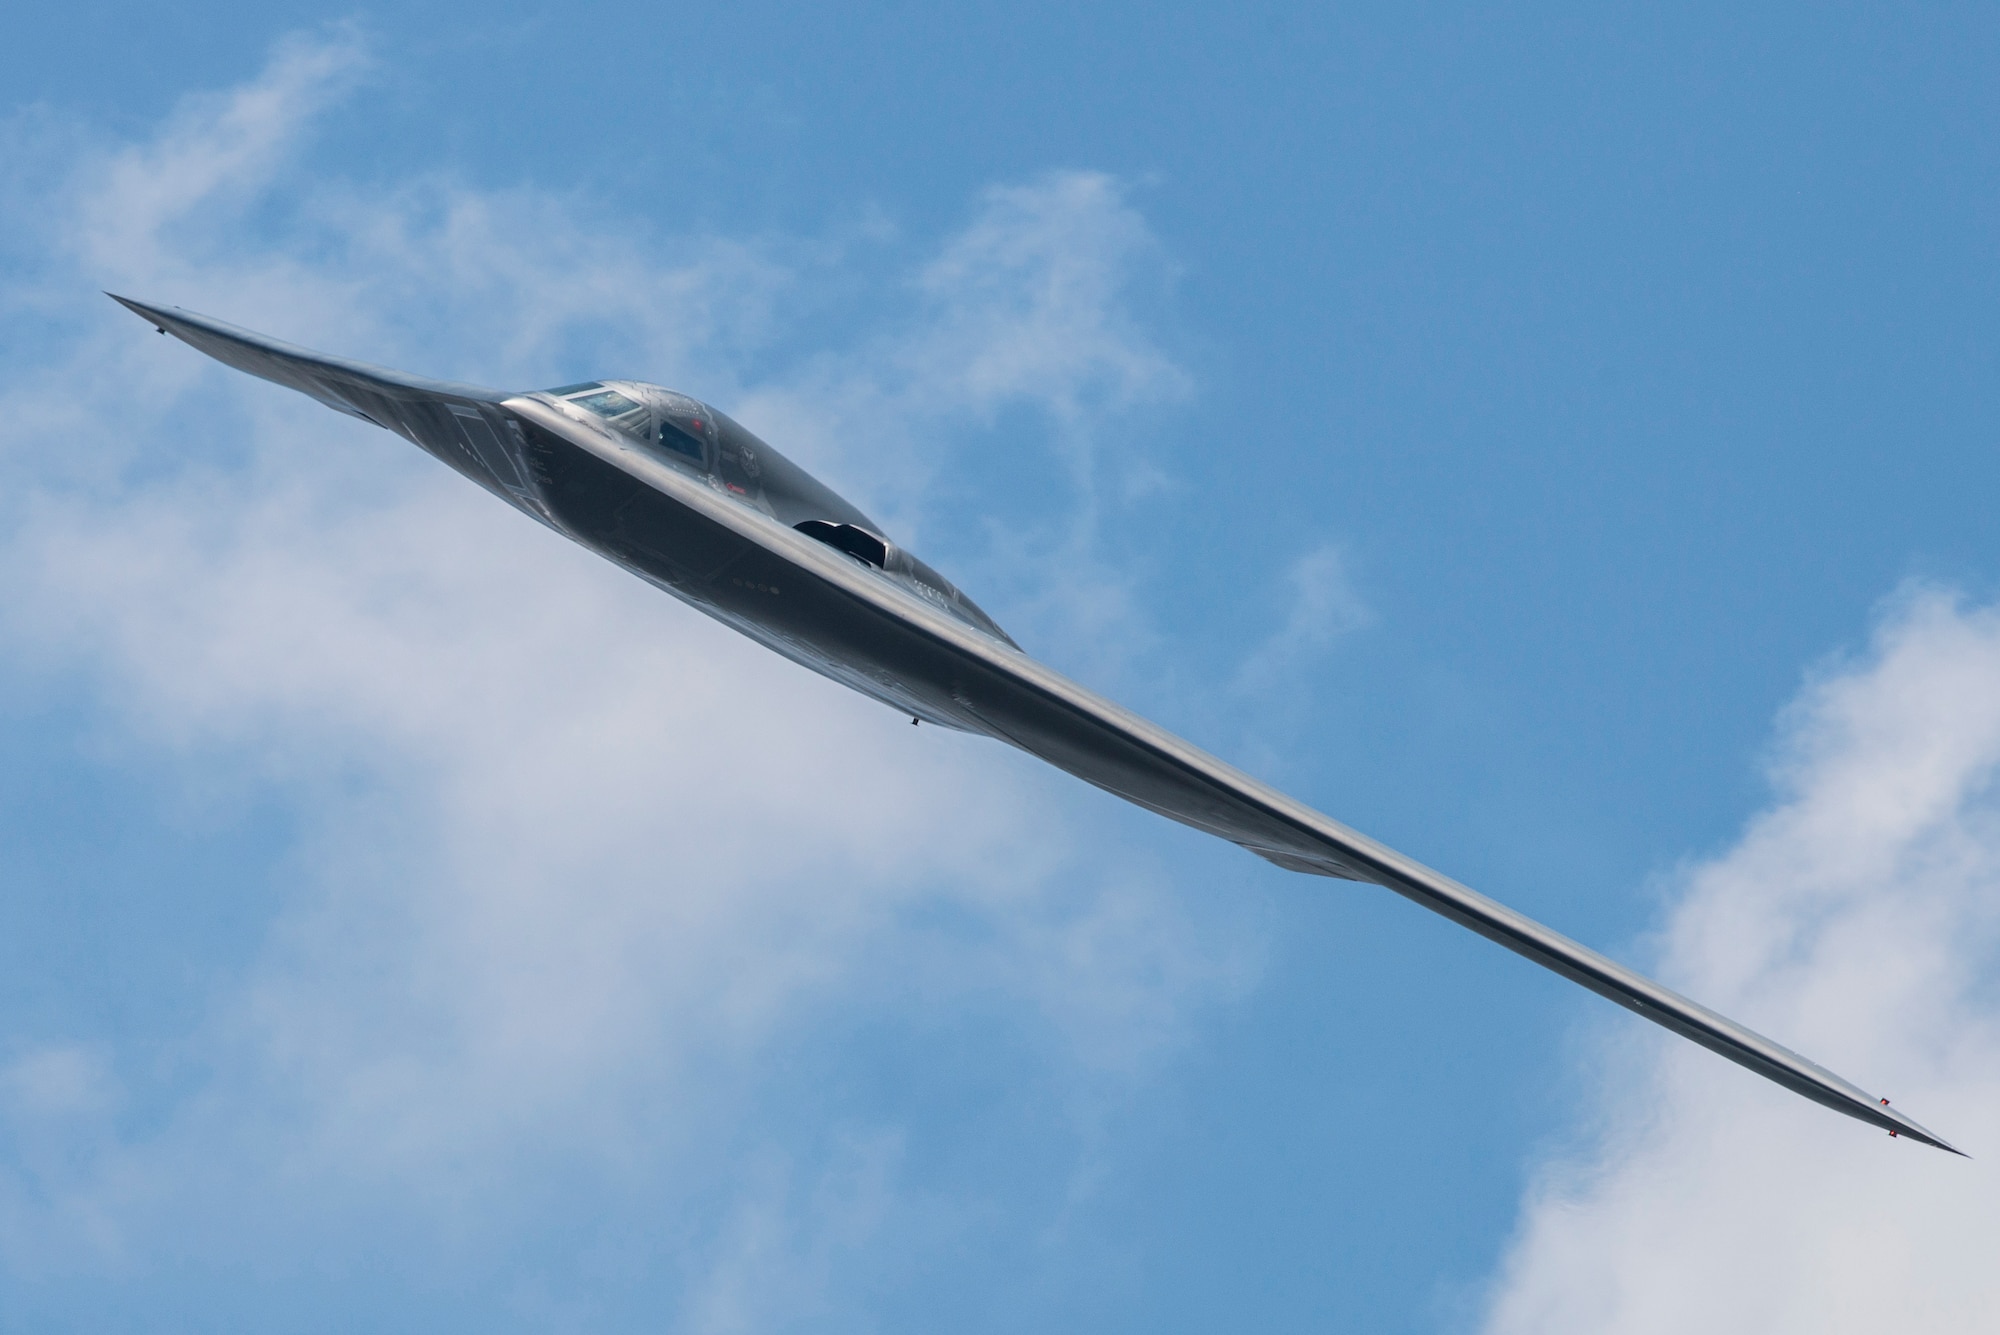 A 509th Bomb Wing B-2 Spirit conducts a fly-by during the Scott Air Force Base 2017 Air Show and Open House June 11, which celebrates the base’s 100th anniversary.  The B-2 is a multi-role bomber capable of delivering both conventional and nuclear munitions and represents a major milestone in the U.S. bomber modernization program.  With a crew of two pilots, this aircraft brings a massive firepower to bear, in a short time, anywhere on the globe through impenetrable defenses.